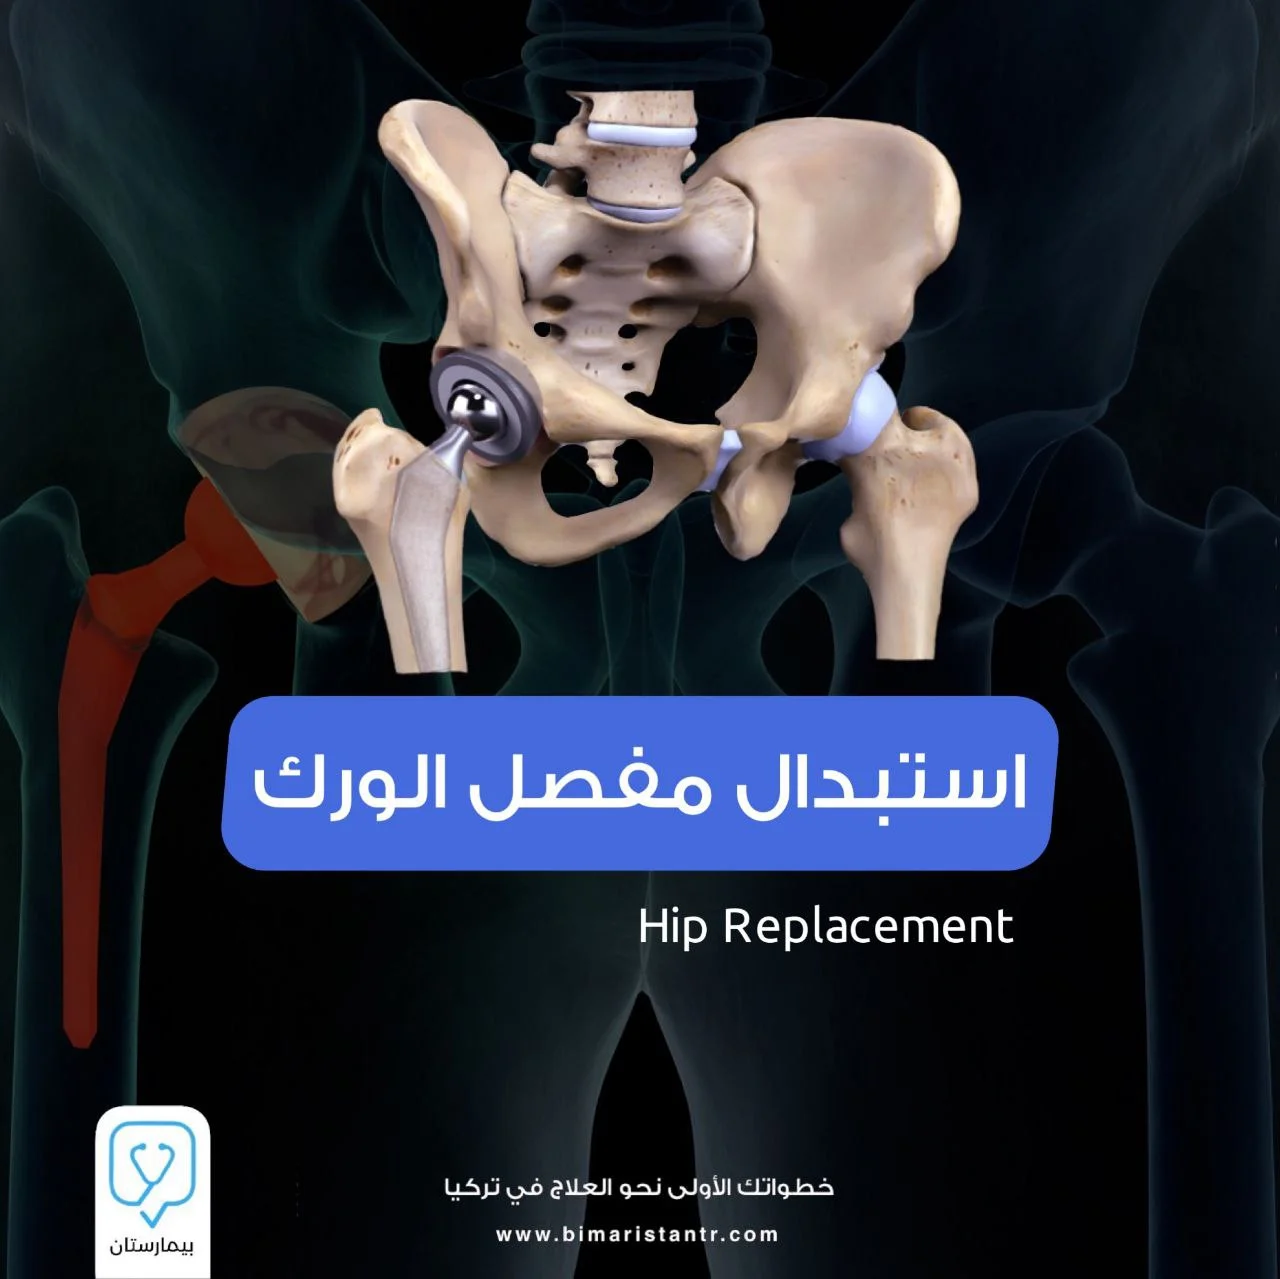 Hip joint replacement surgery